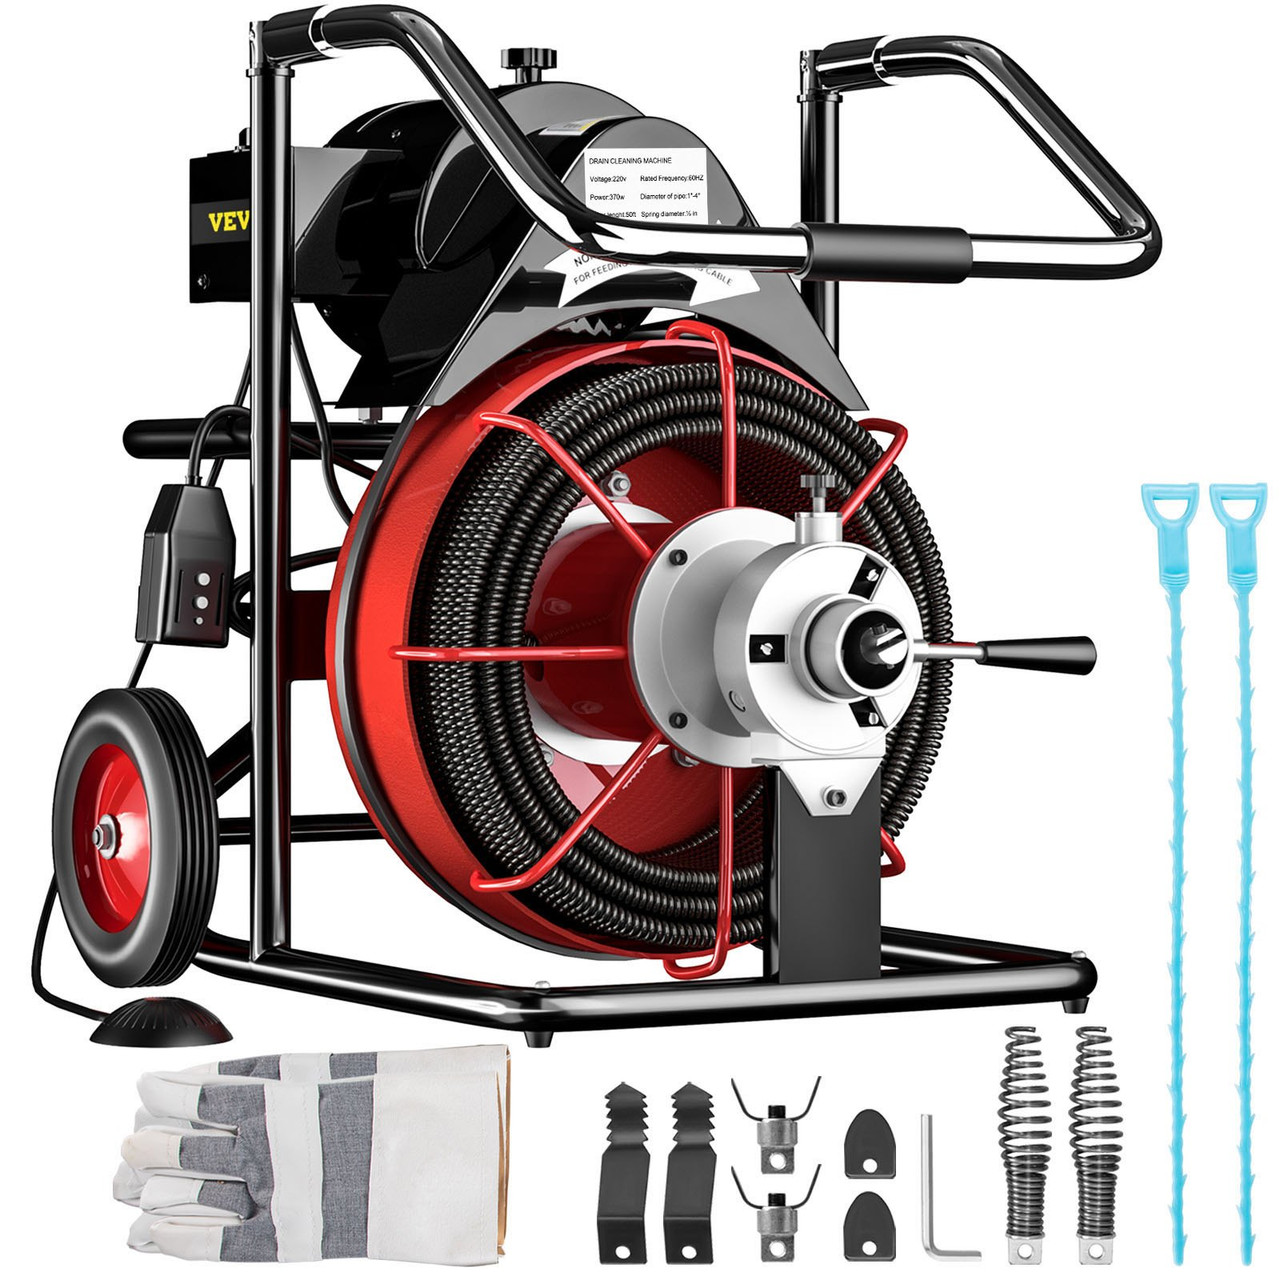 50 Ft x 1/2Inch Drain Cleaner Machine Auto Feed fit 1"(25mm) to 4"(100mm) Pipes 370W Open Drain Cleaning Machine Portable Electric Drain Auger with Cutters Glove Sewer Snake